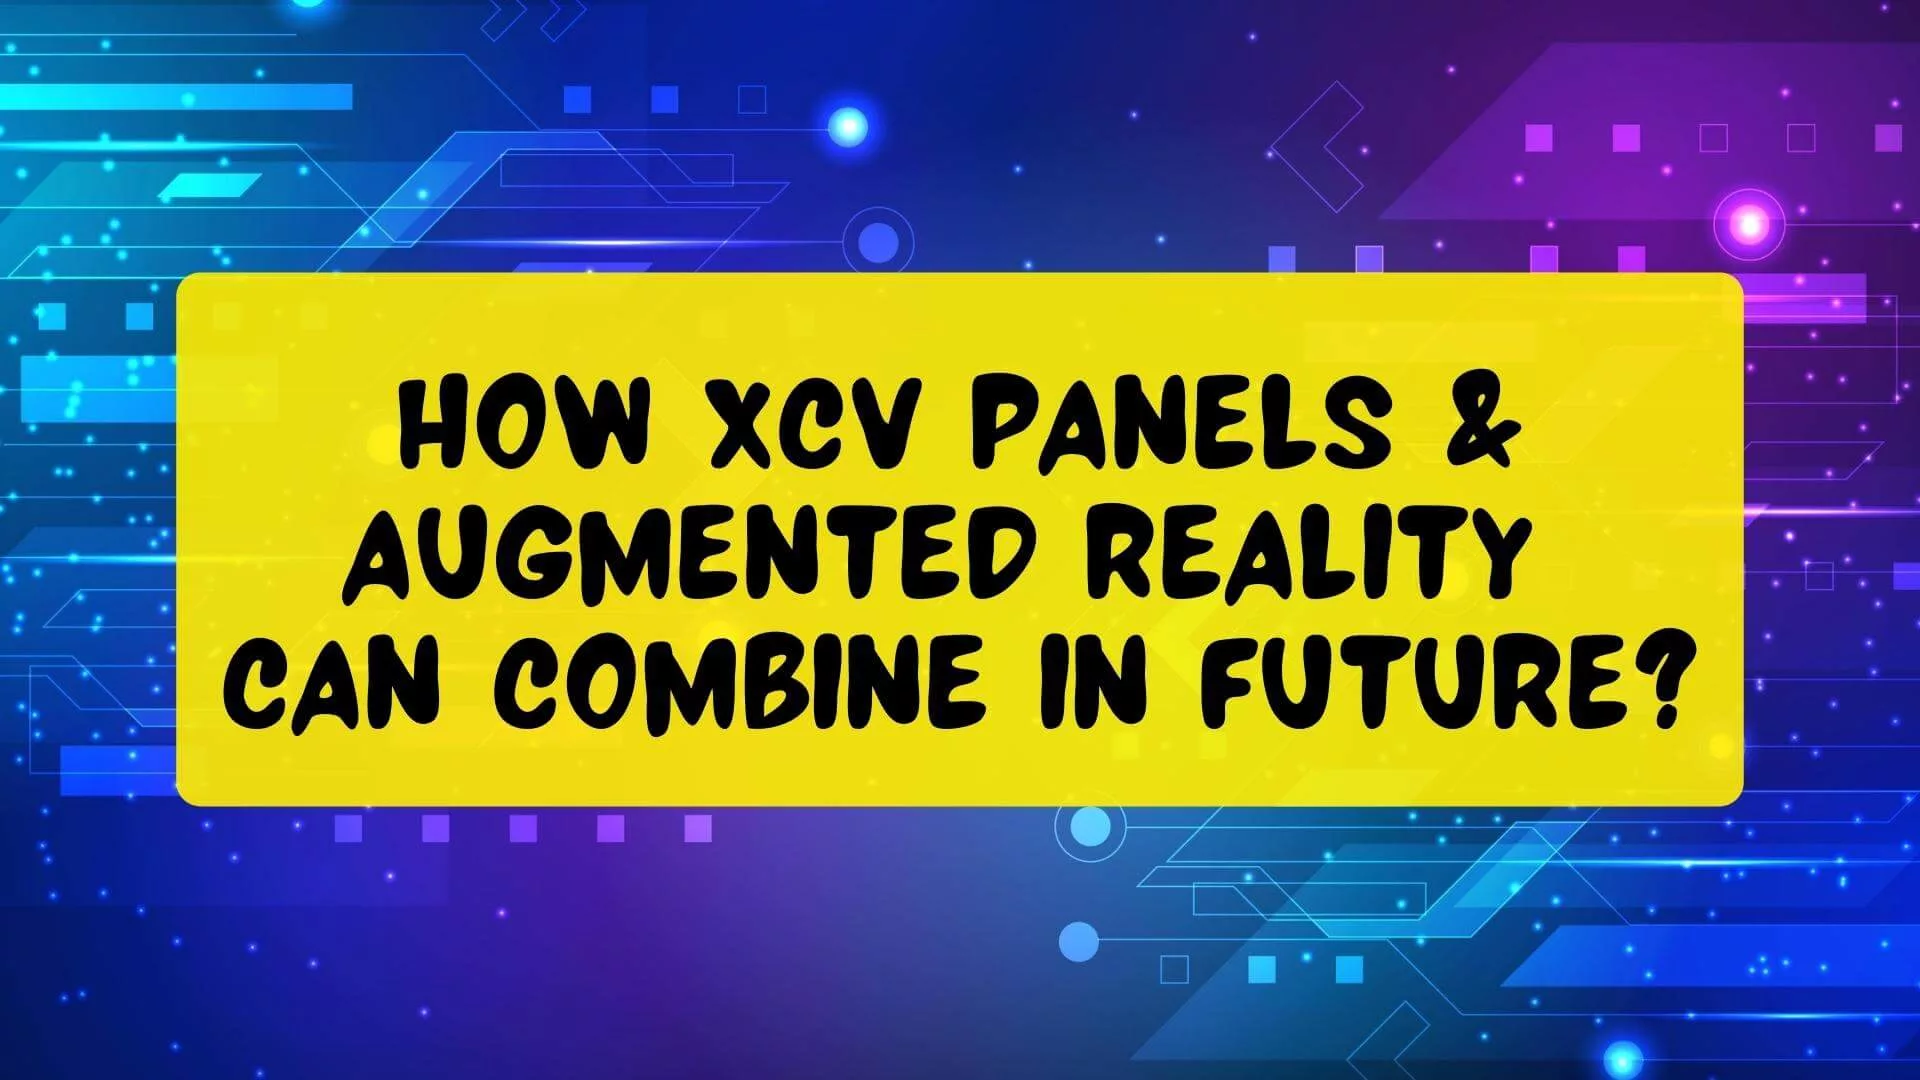 How XCV Panels & Augmented Reality Can Combine in Future?